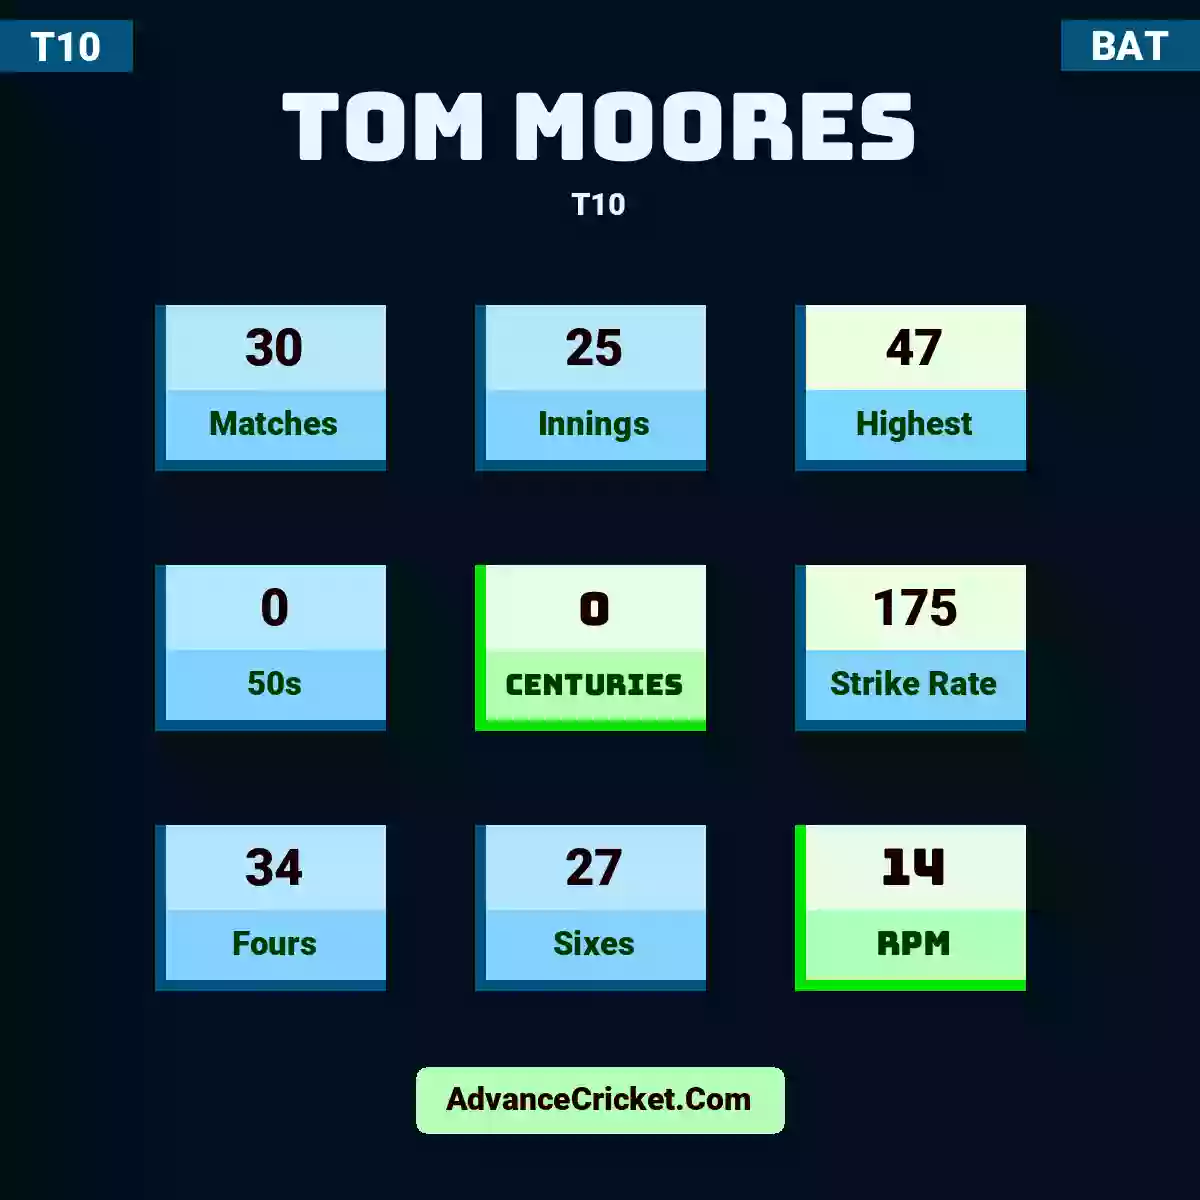 Tom Moores T10 , Tom Moores played 30 matches, scored 47 runs as highest, 0 half-centuries, and 0 centuries, with a strike rate of 175. T.Moores hit 34 fours and 27 sixes, with an RPM of 14.